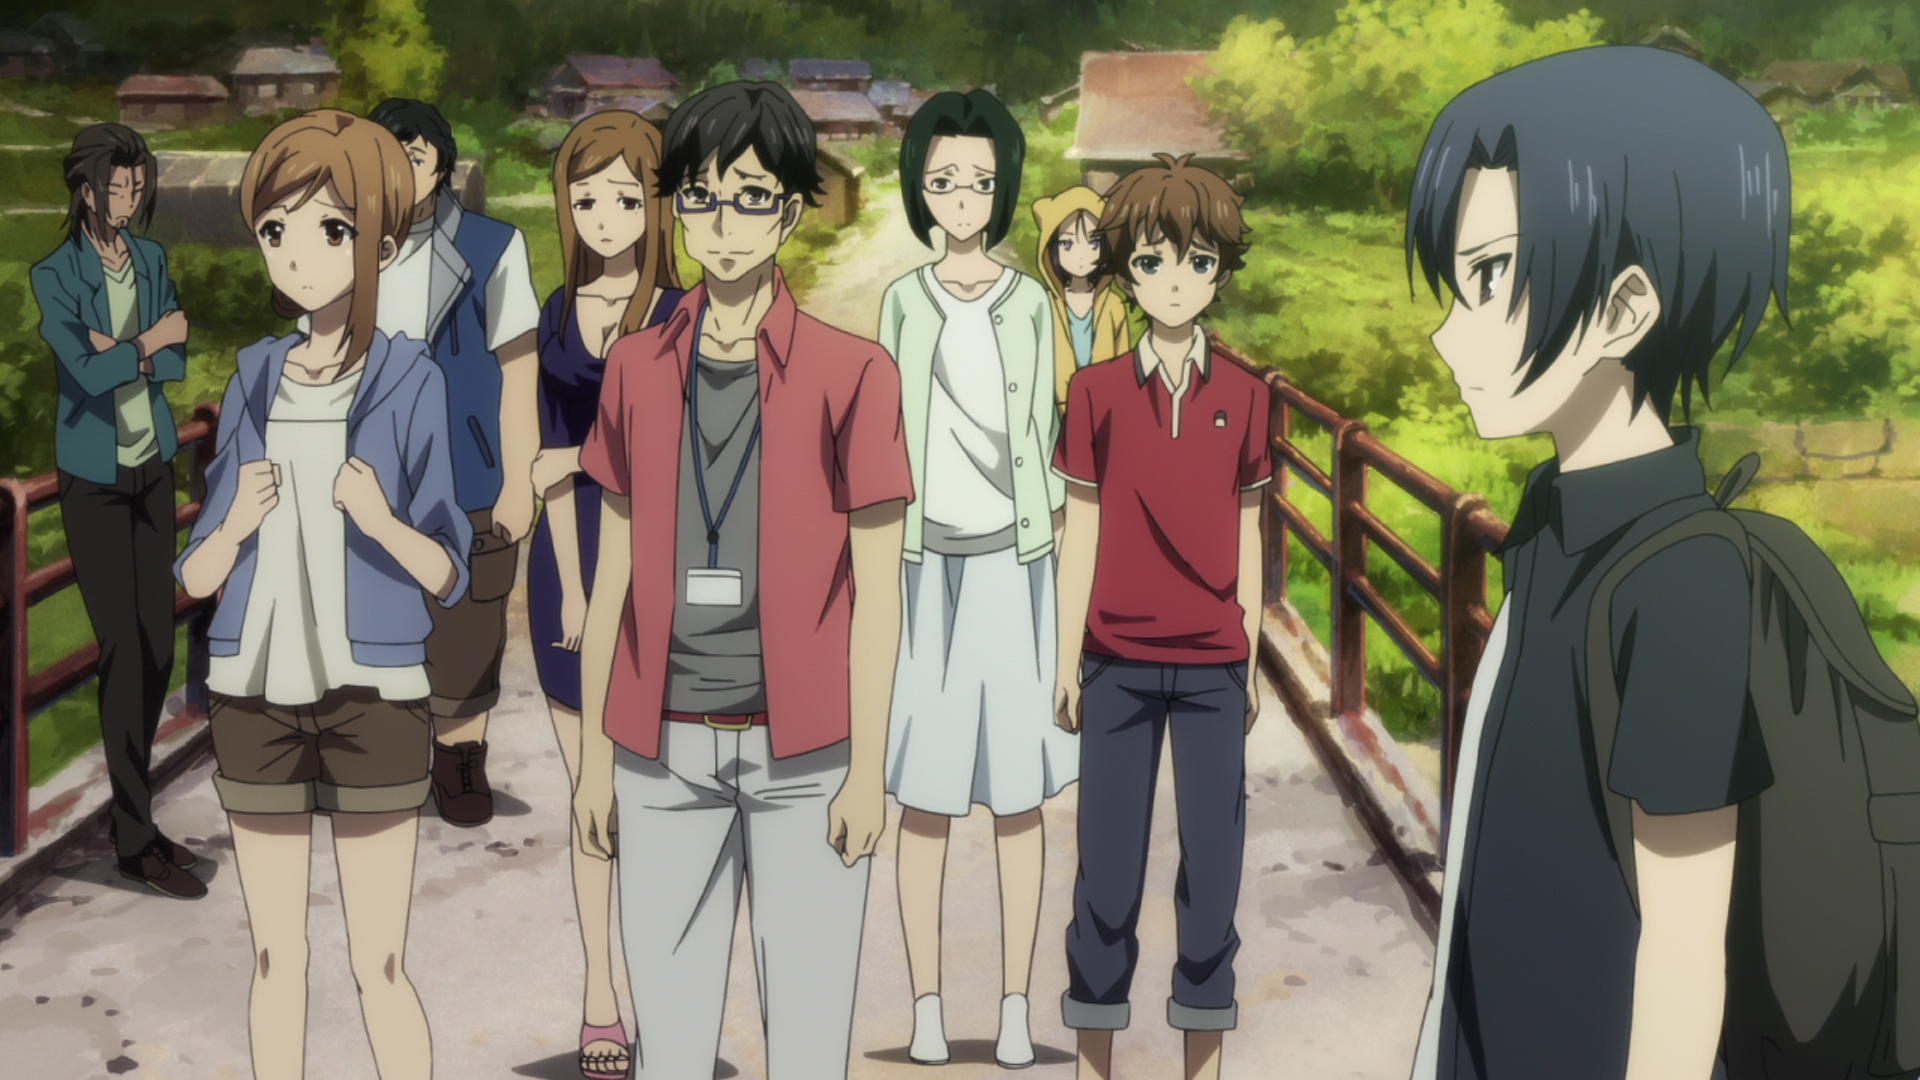 mayoiga-anime-lost-village-review-1